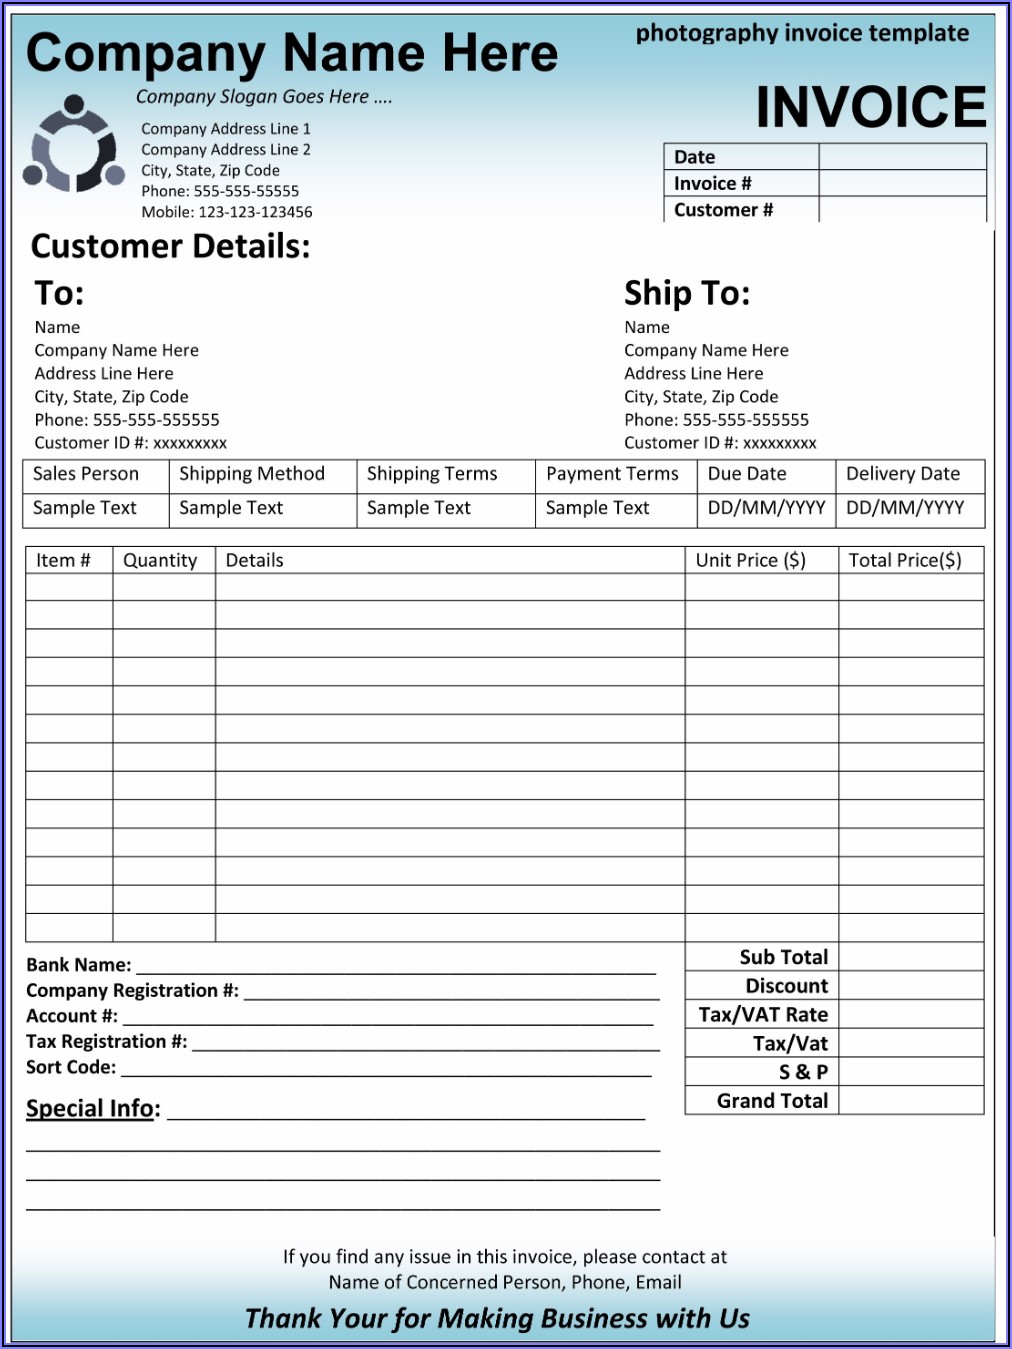 Invoice Format For Builders